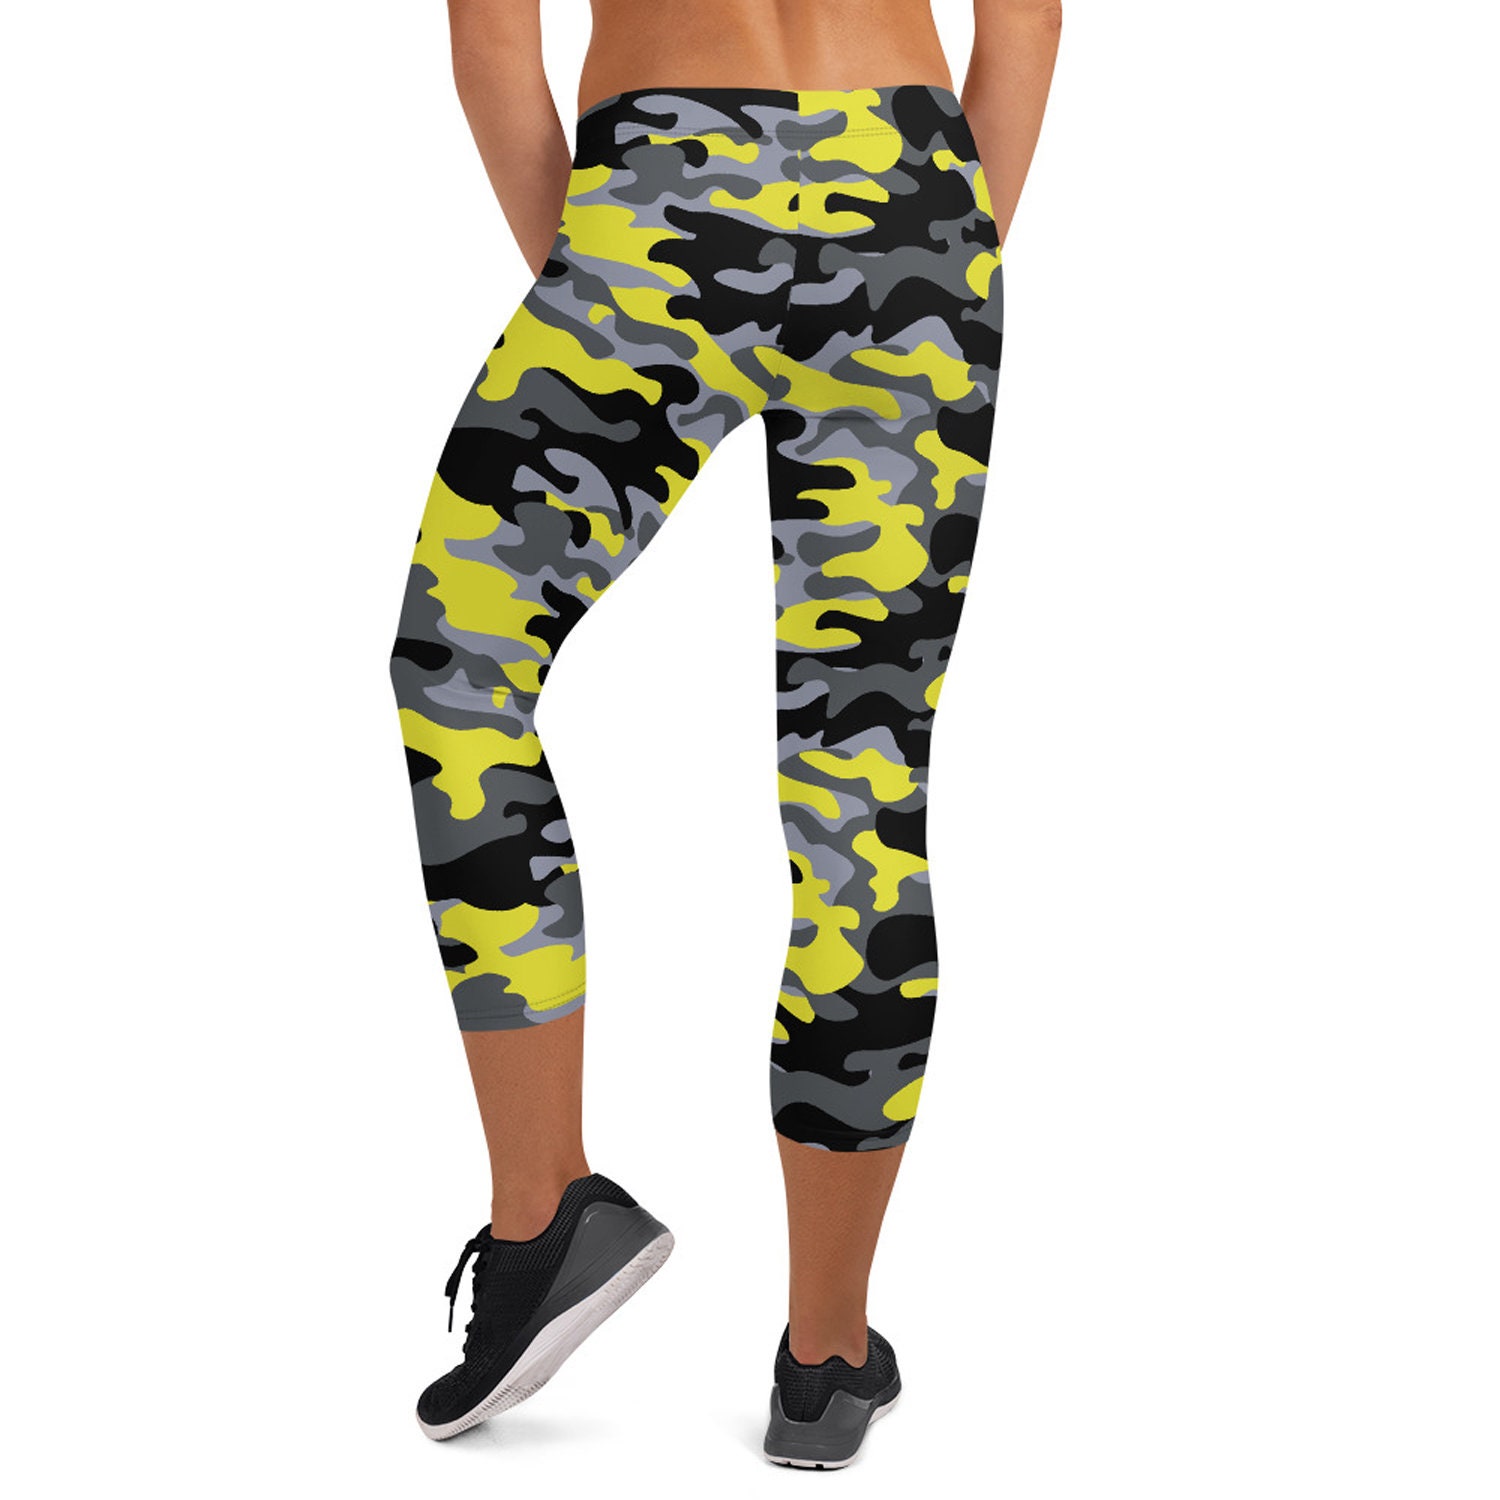 Satori_Stylez Black Camo Leggings for Women Mid Waisted Pants with Dark and Gray  Camouflage Print at  Women's Clothing store